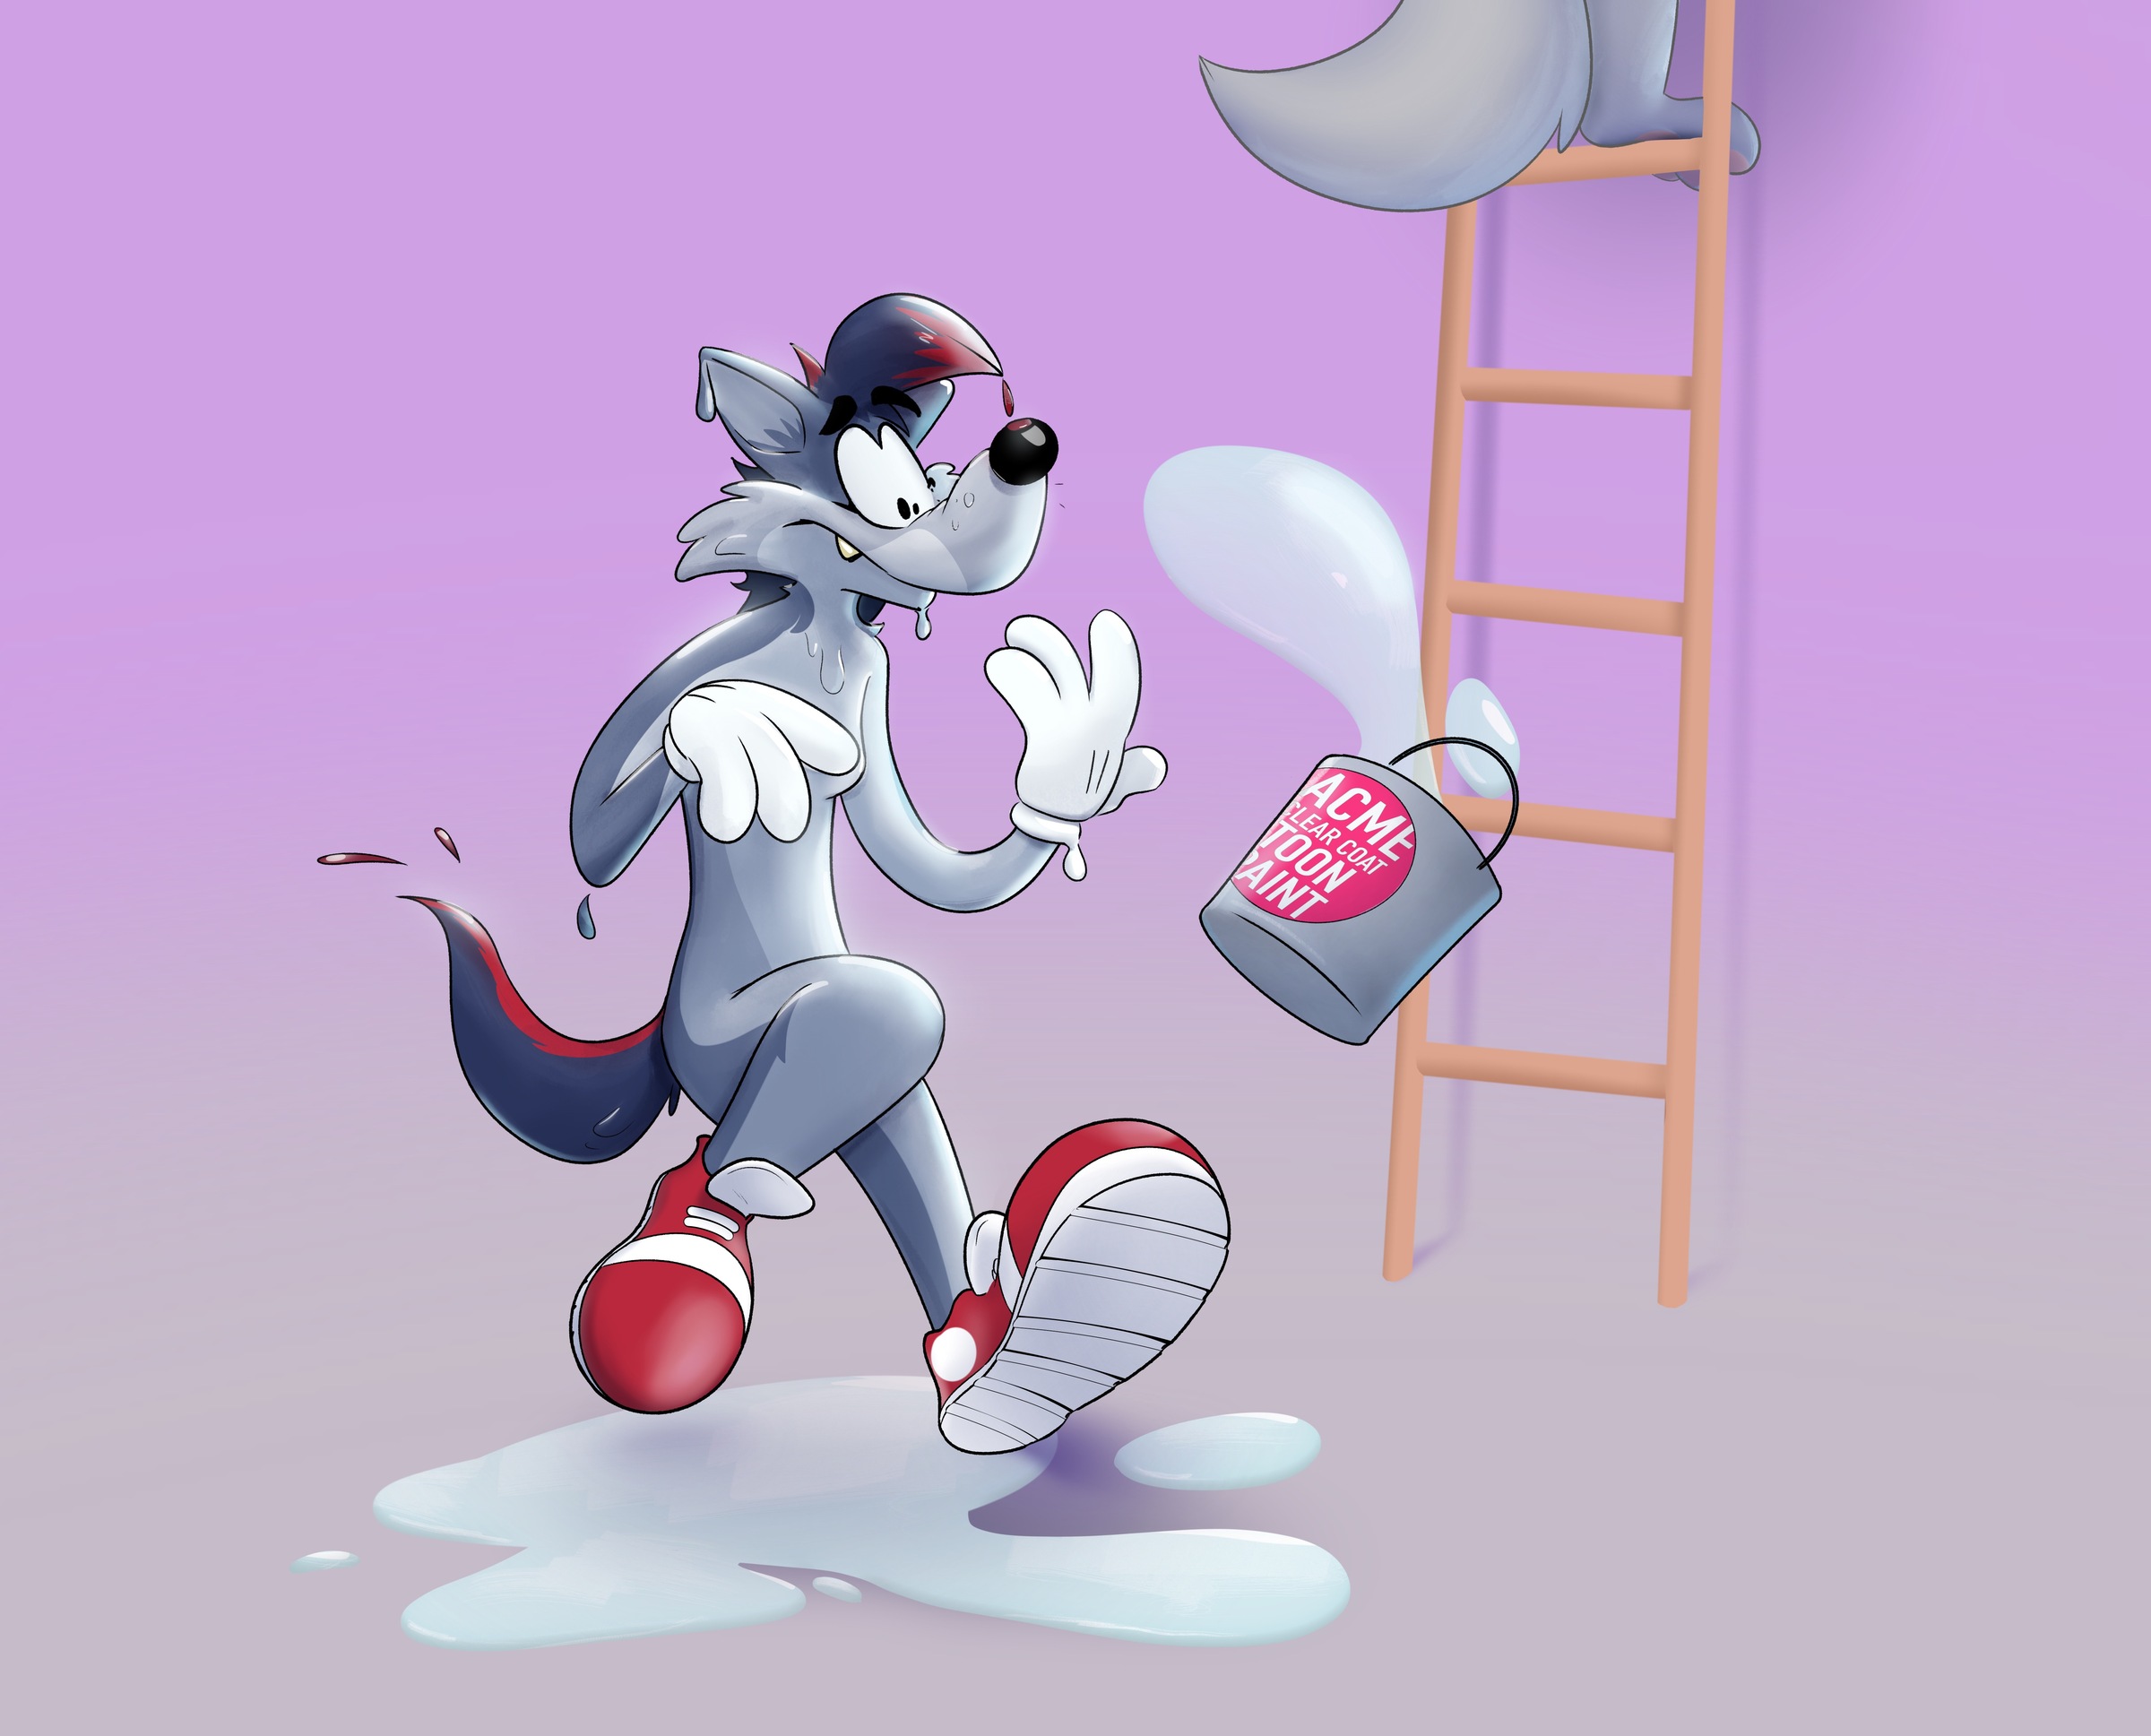 A surprised anthro wolf looking at his white-gloved hands. He has been covered in thick liquid from a falling paint can labelled “ACME Clear Coat Toon Paint”. On the right, a ladder is propped up with a second wolf’s feet and tail visible at the top edge of the frame 